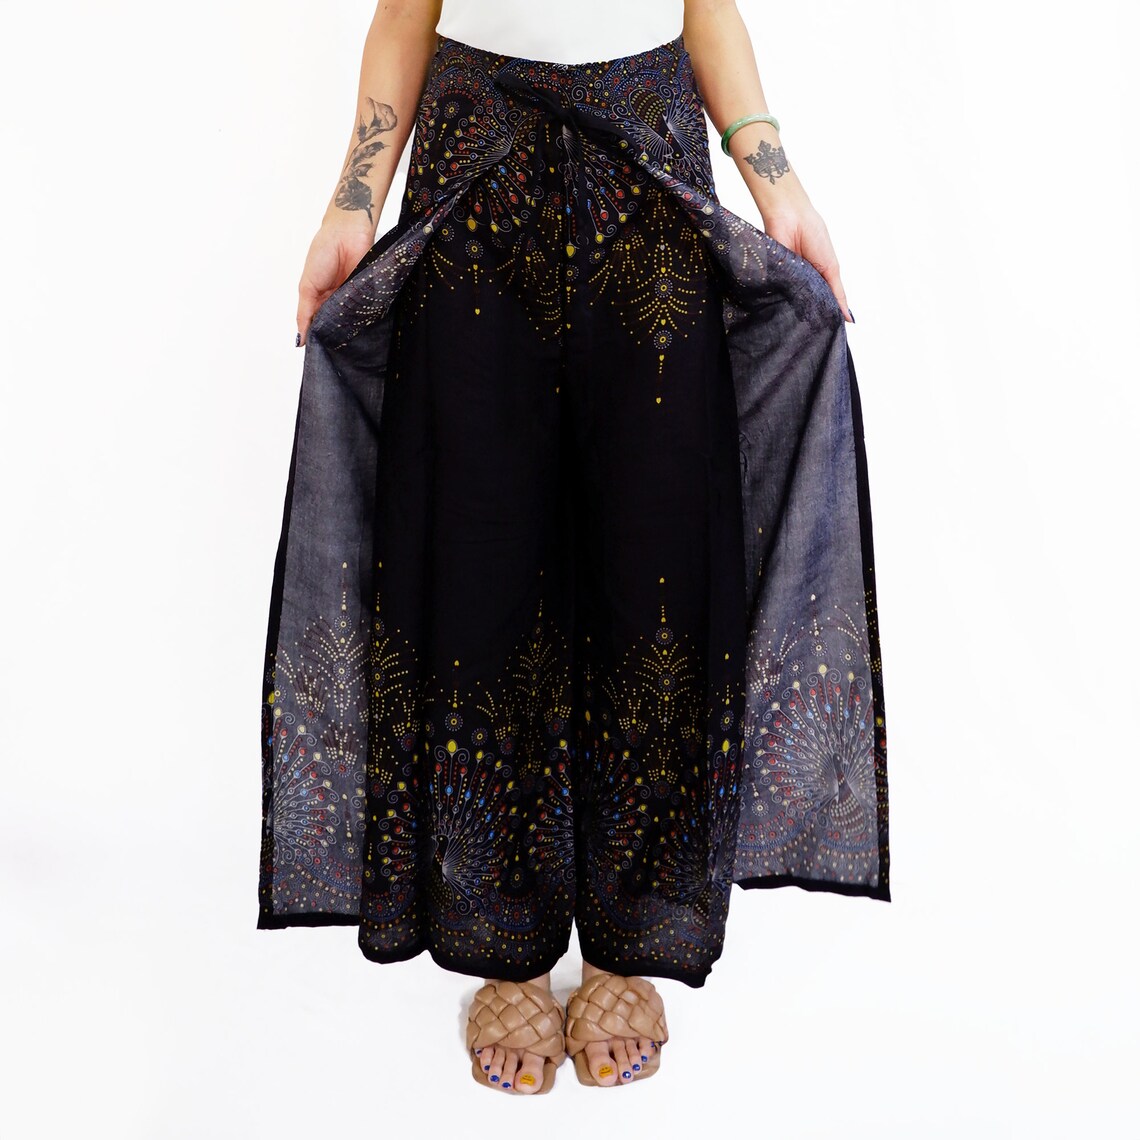 Trendy black boho wrap pants with a distinctive peacock feather print, perfect for a fashionable and comfortable look.